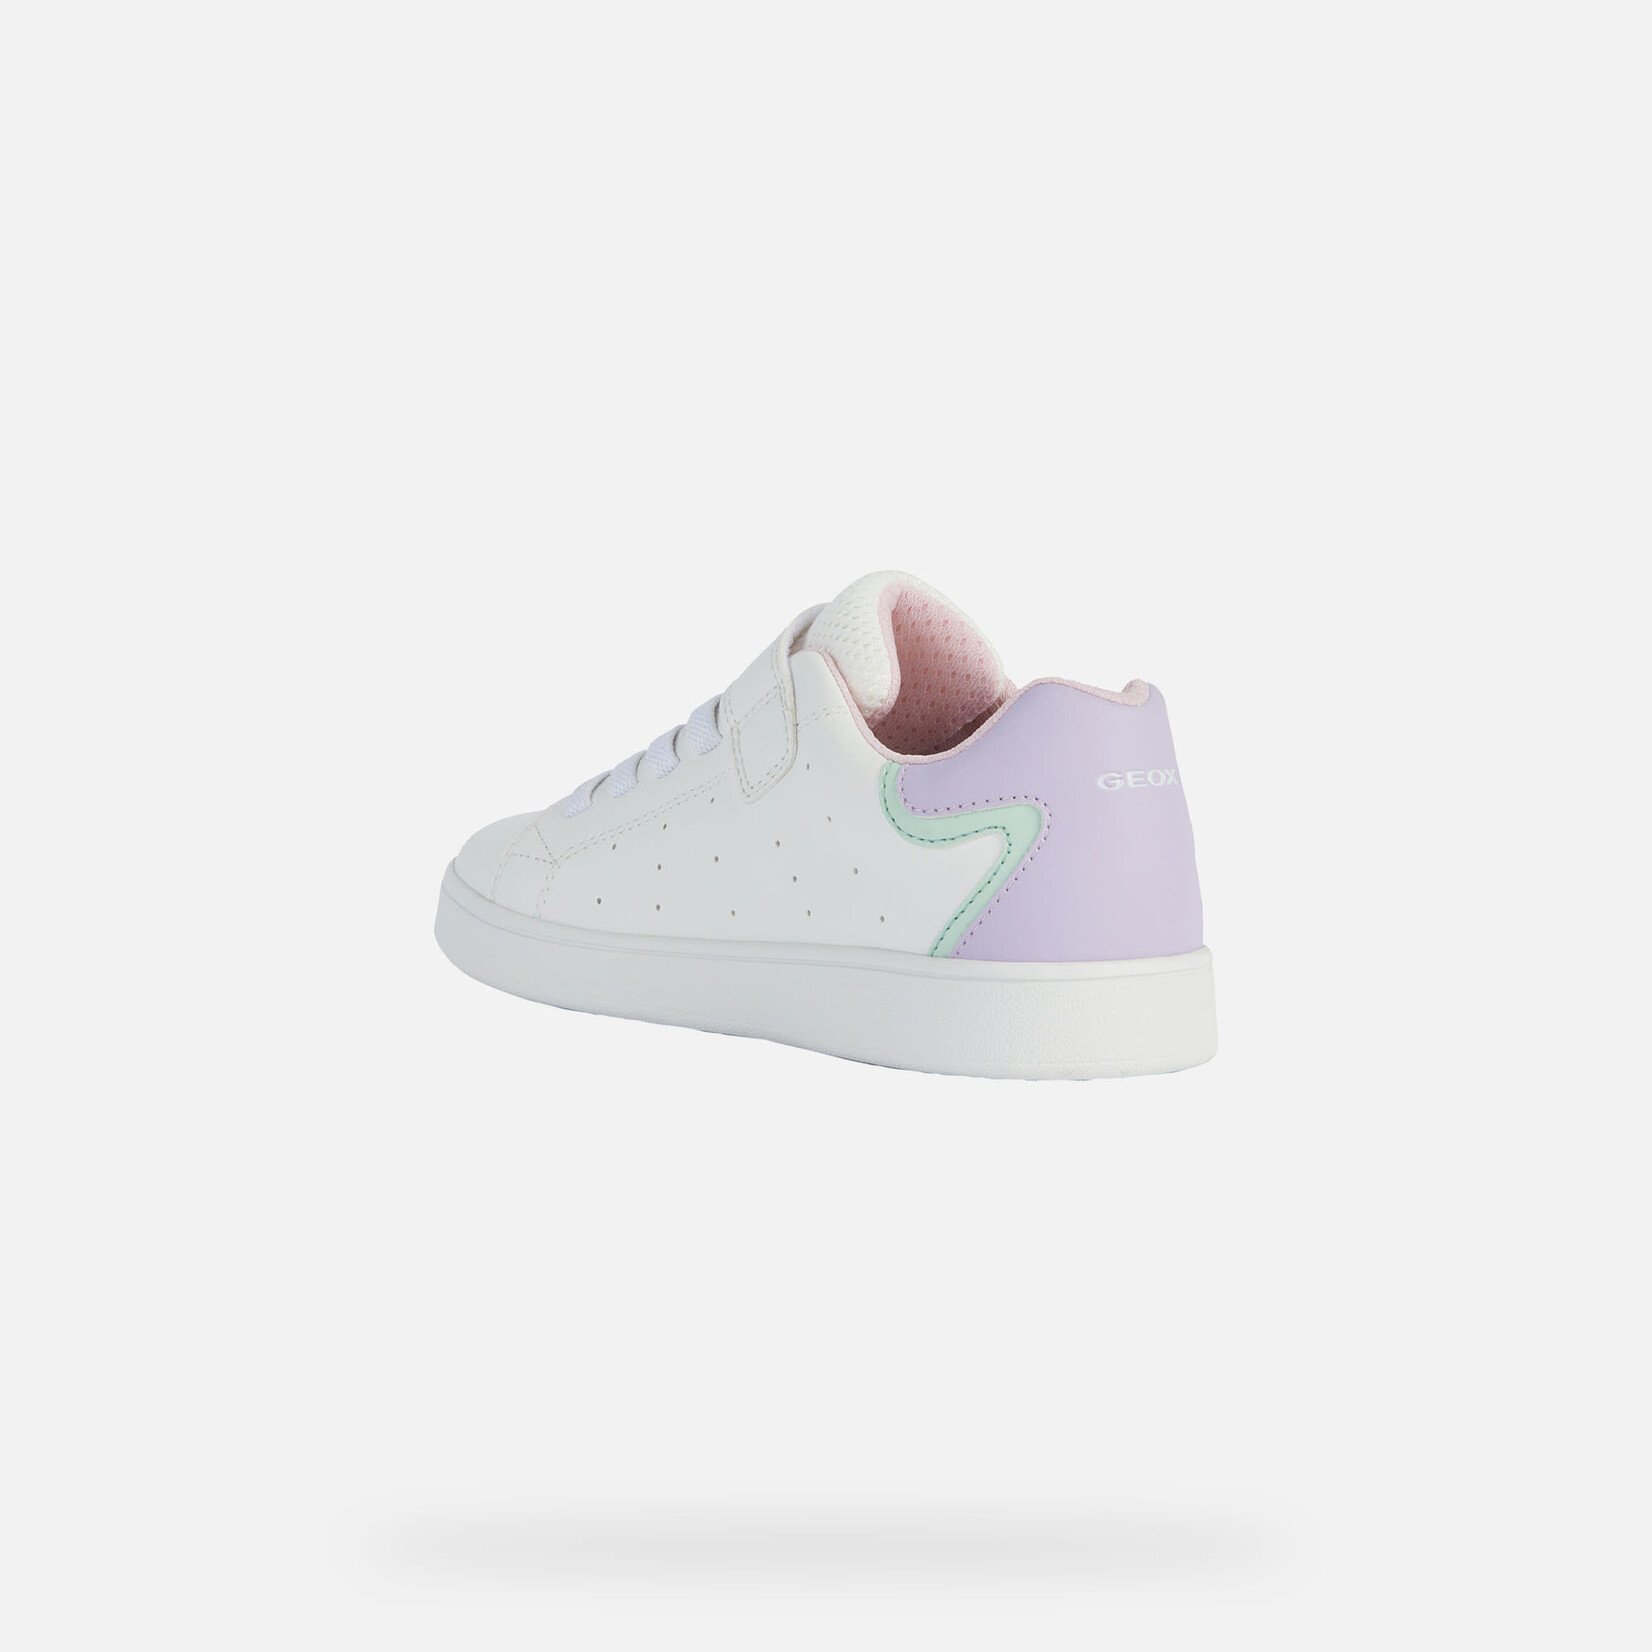 Geox GEOX - Chaussures blanches de cuir synthétique 'Eclyper - Blanc/Lilas'